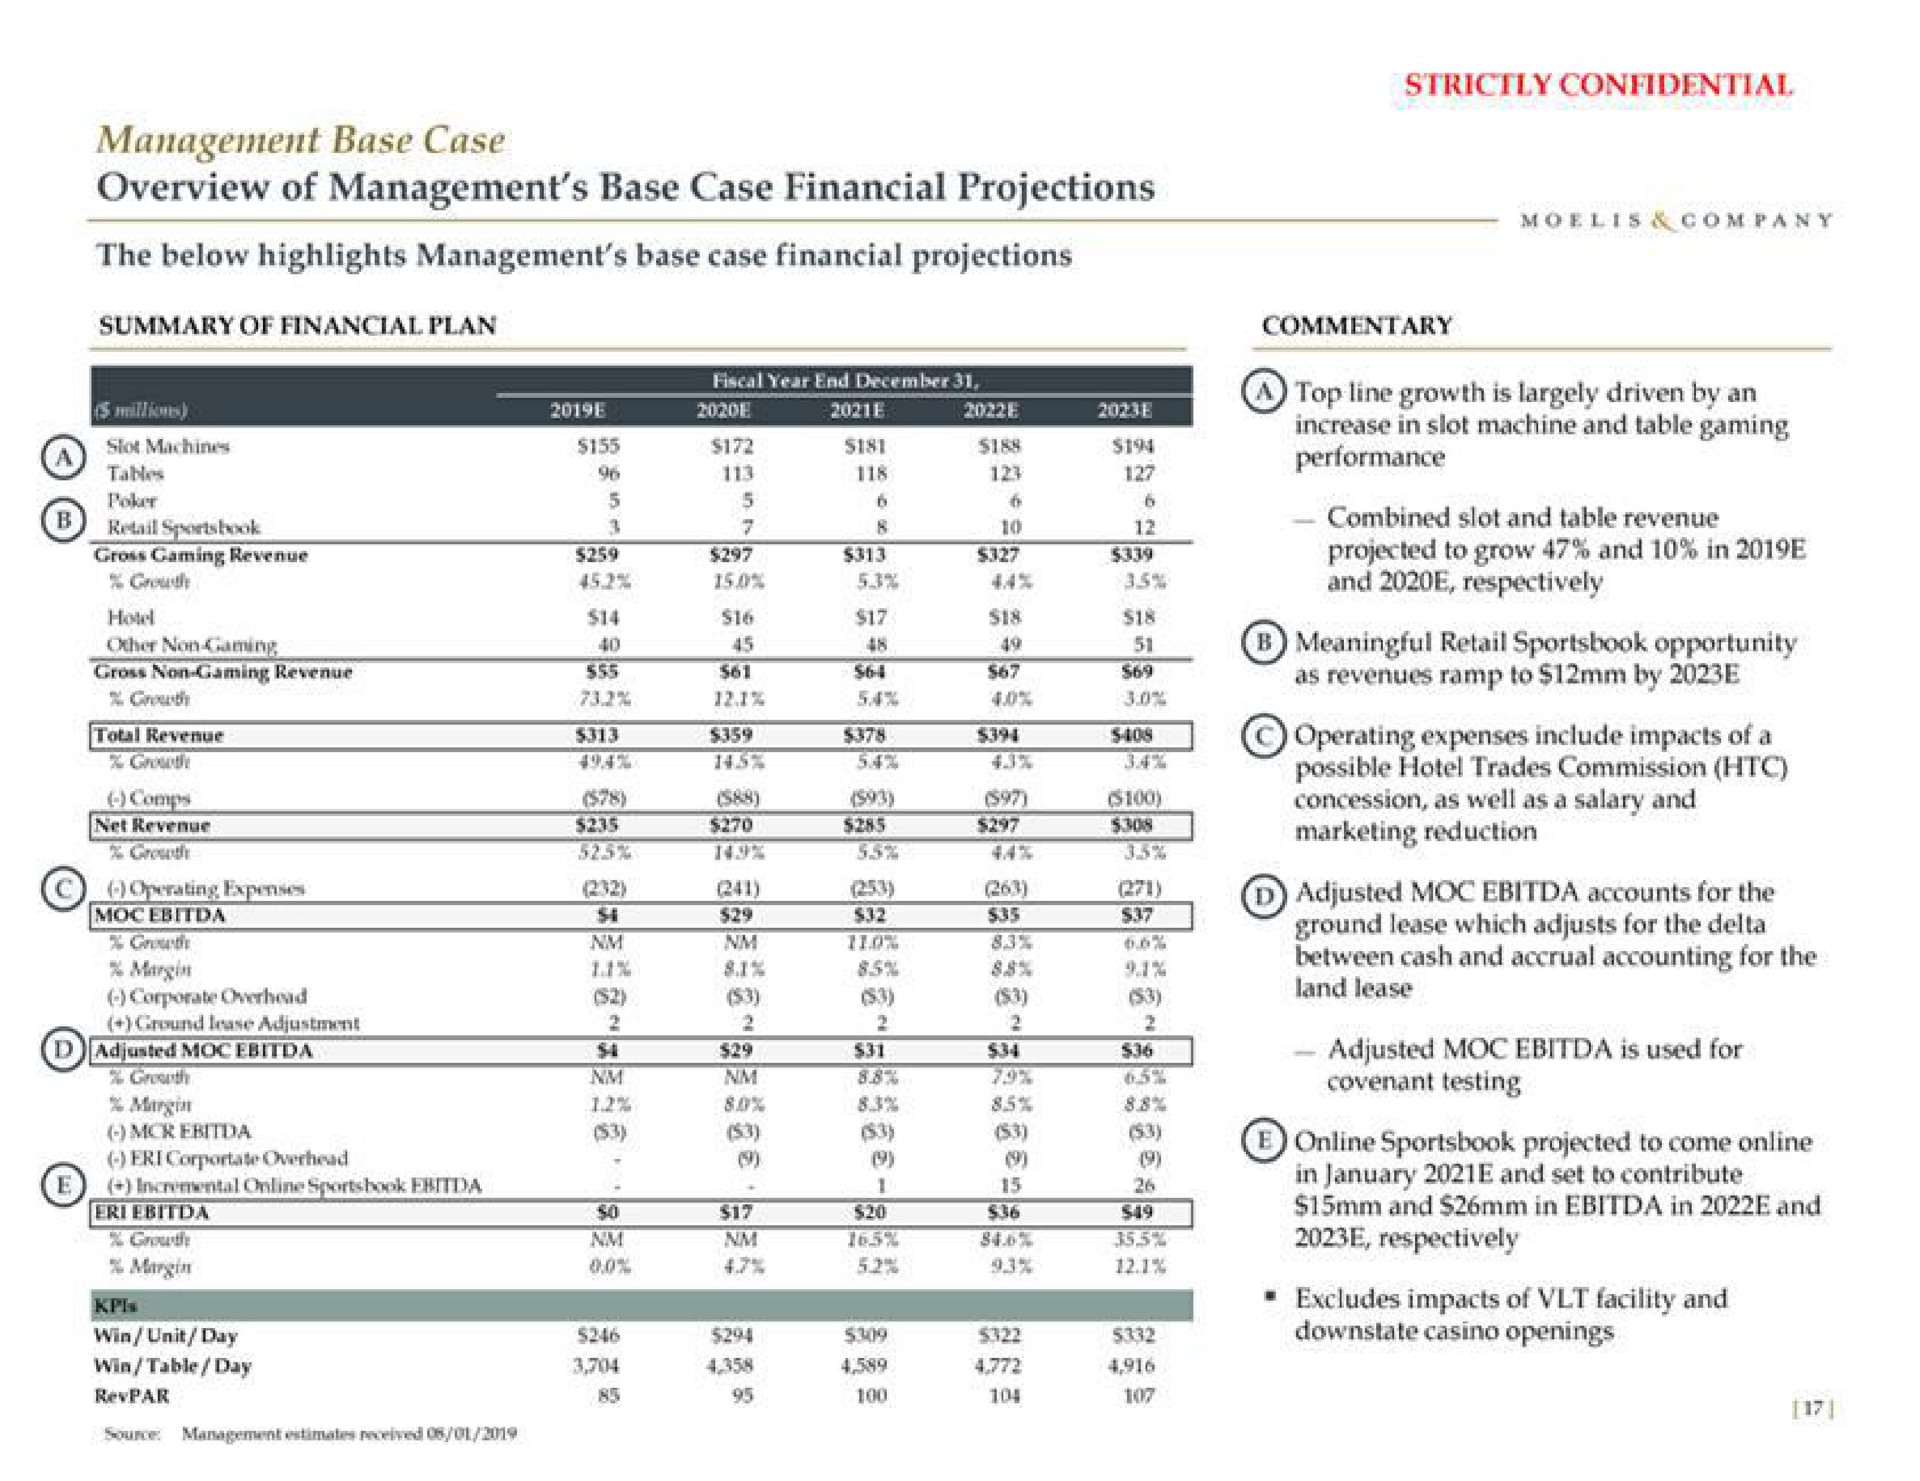 management base case overview of management base case financial projections the below highlights management base case financial projections | Moelis & Company